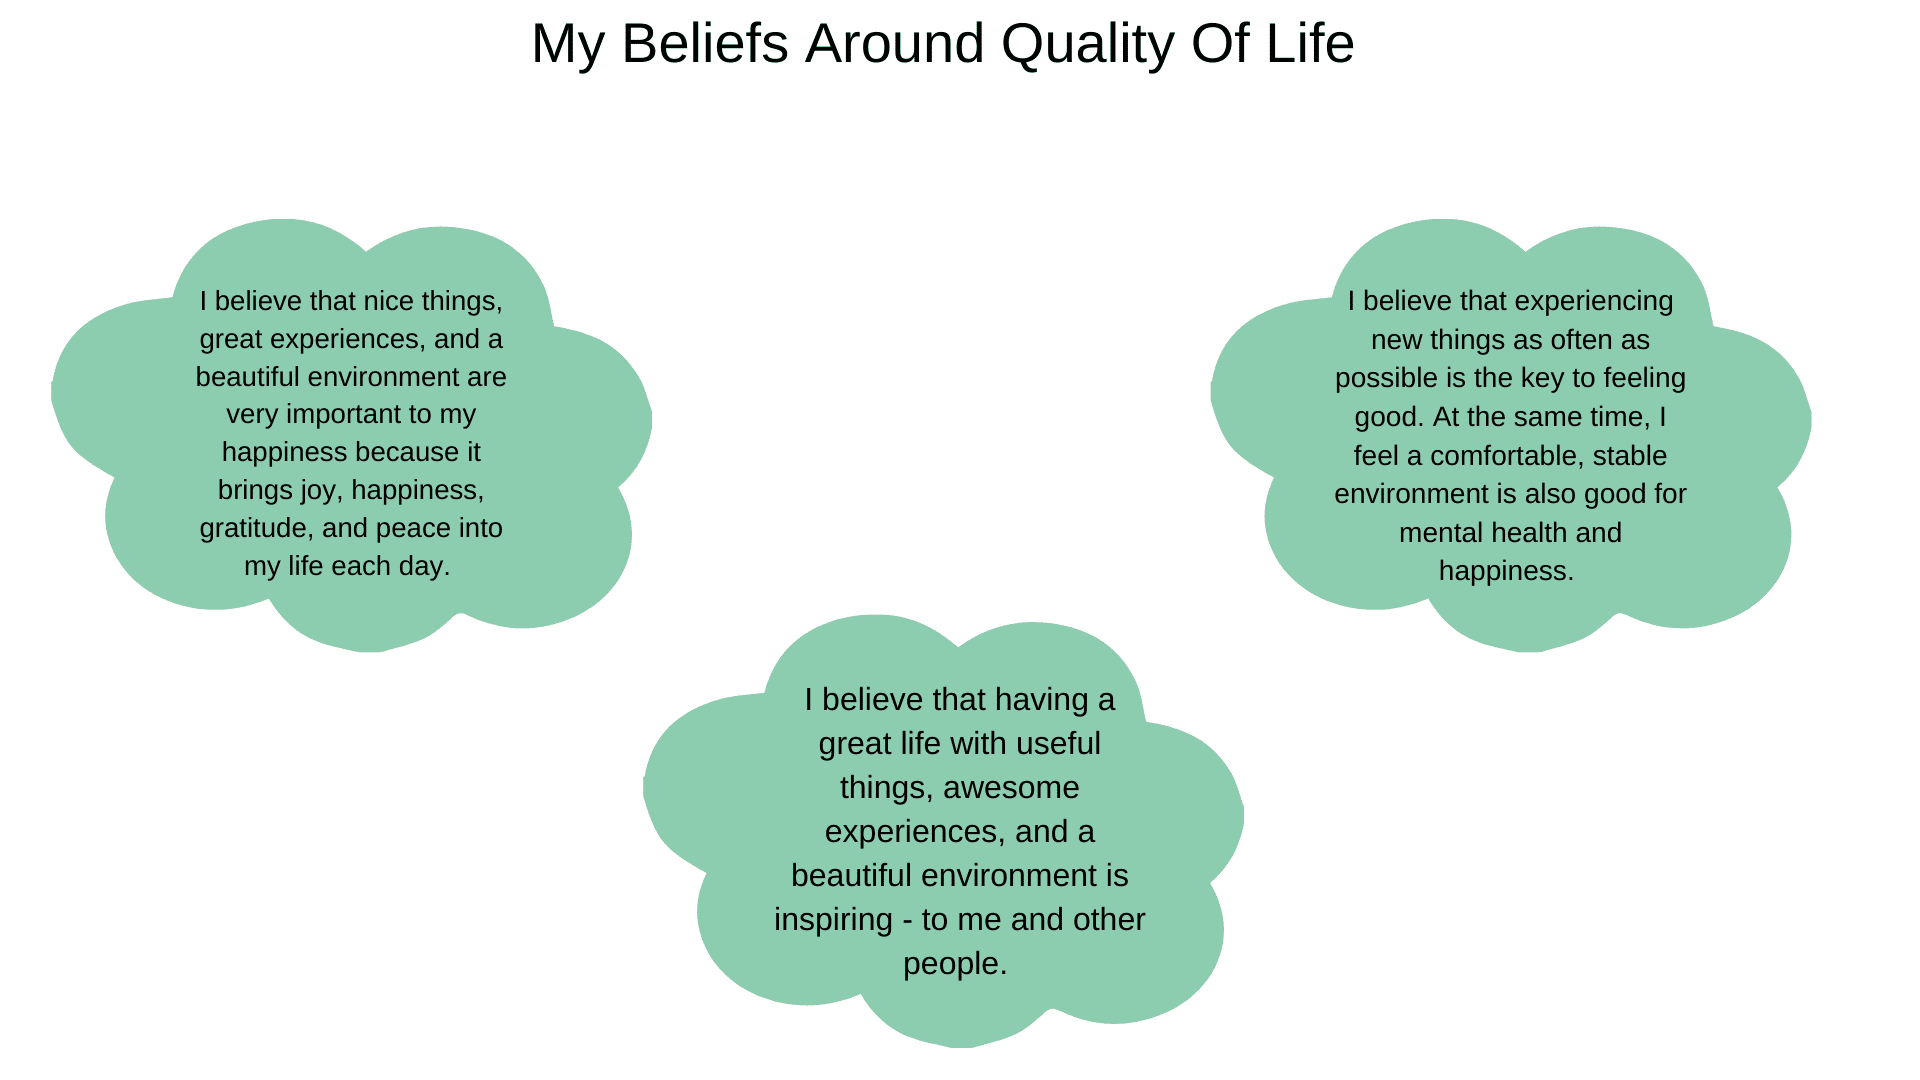 quality of life beliefs